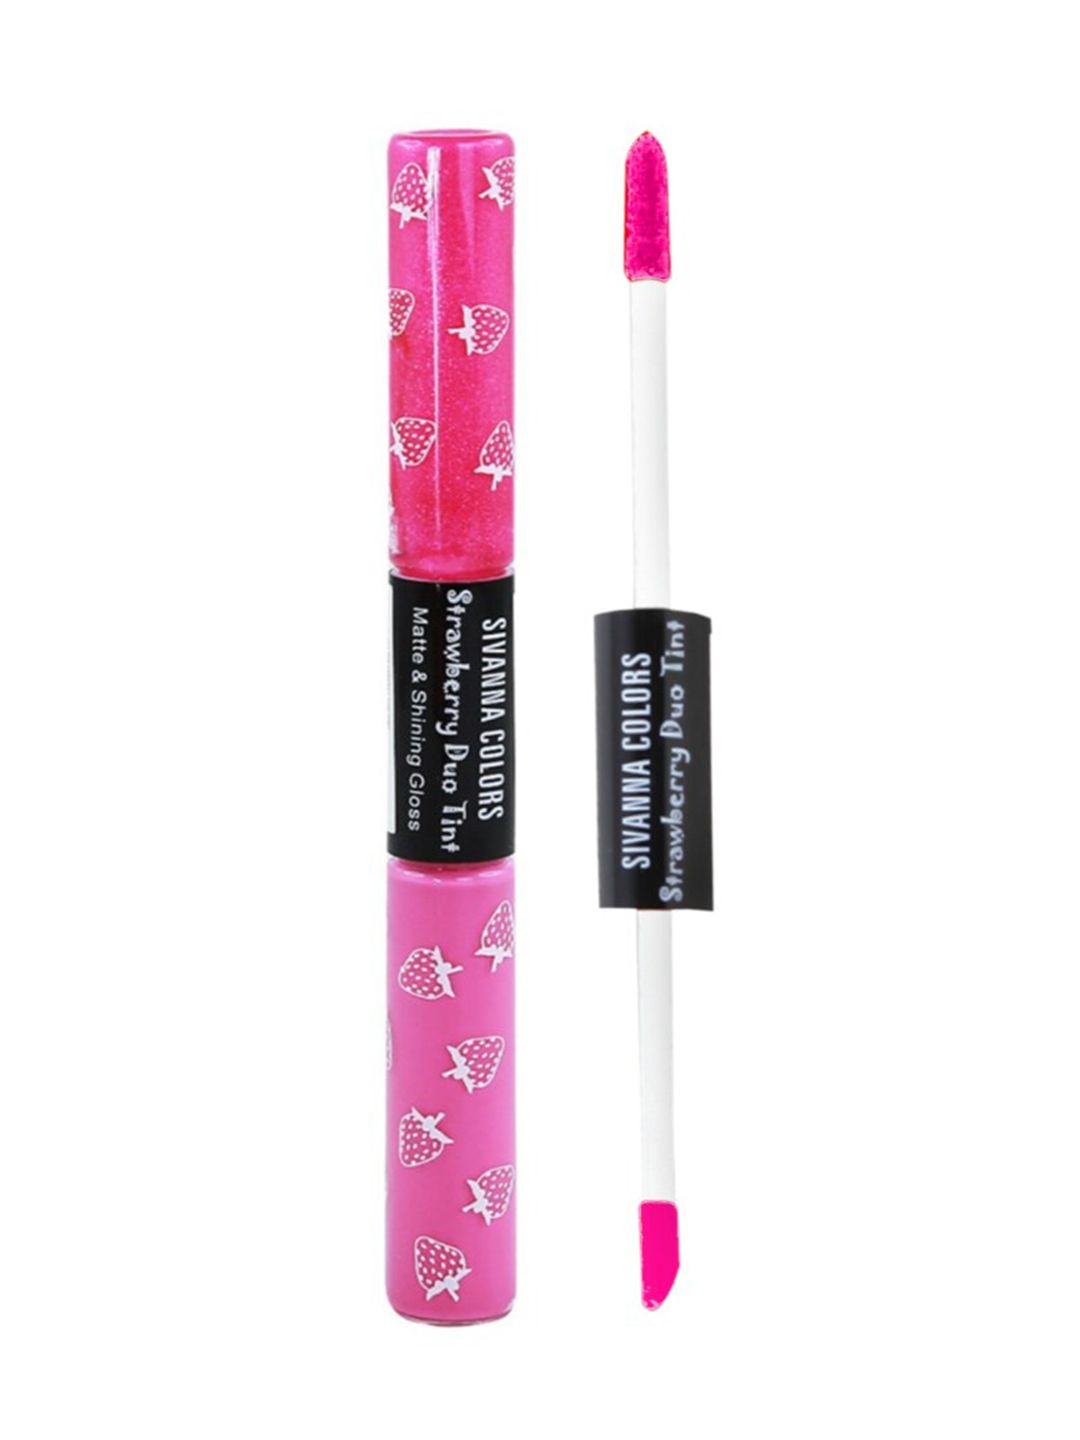 Sivanna Colors 2 in 1 Strawberry Duo Tint Matte & Shining Lip Gloss - DK035 12 Price in India